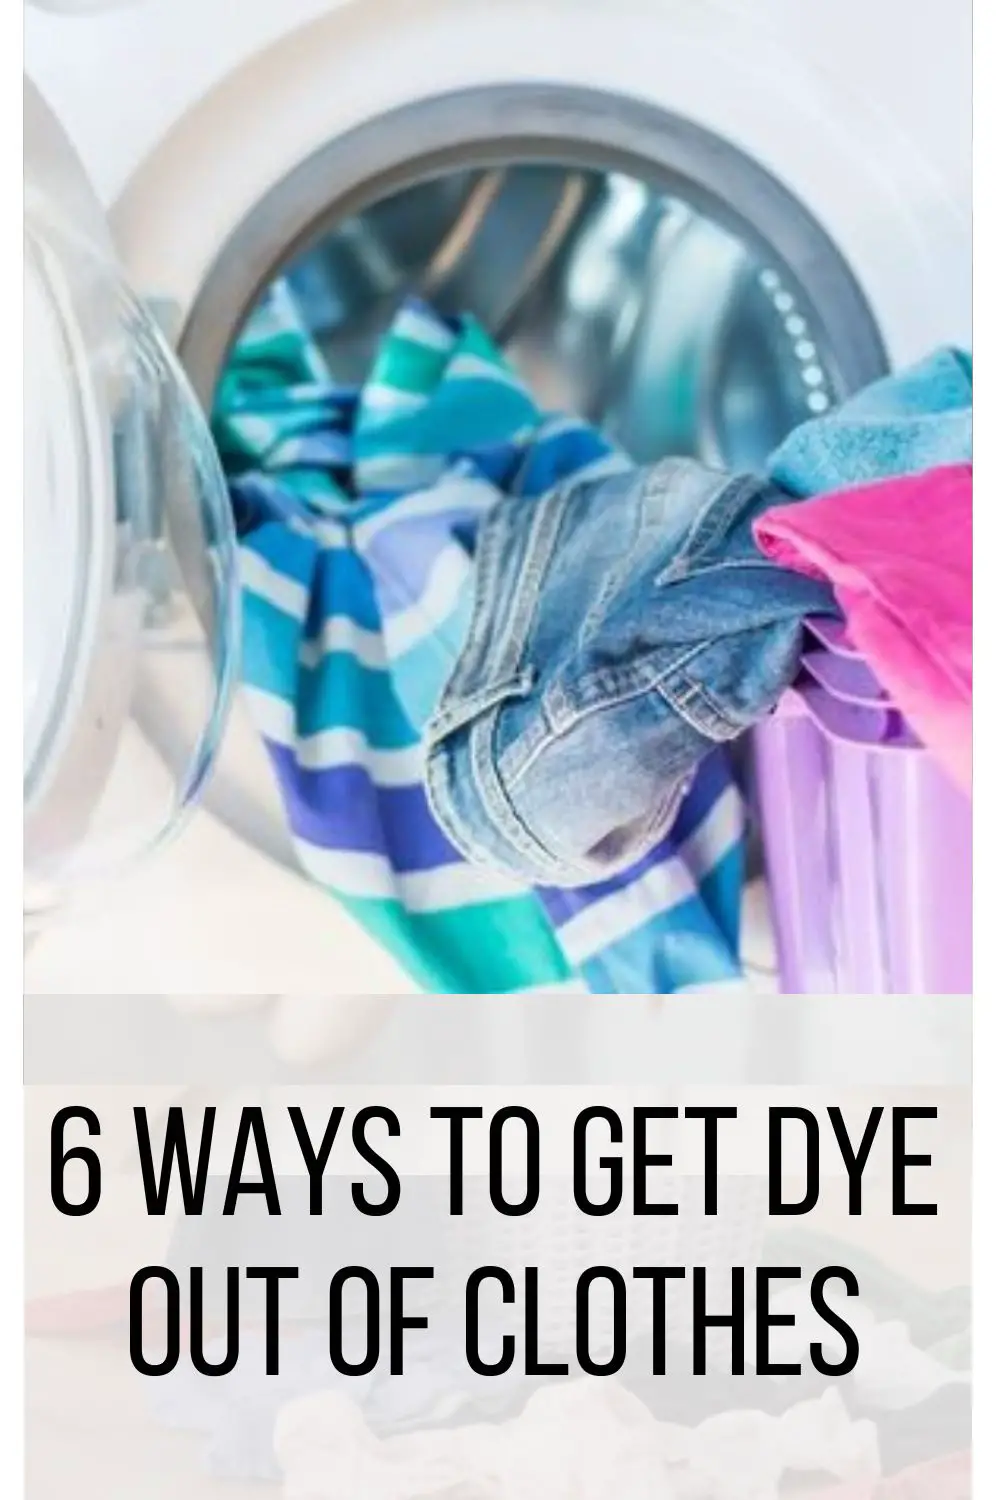 6 Ways to Get Dye Out of Clothes